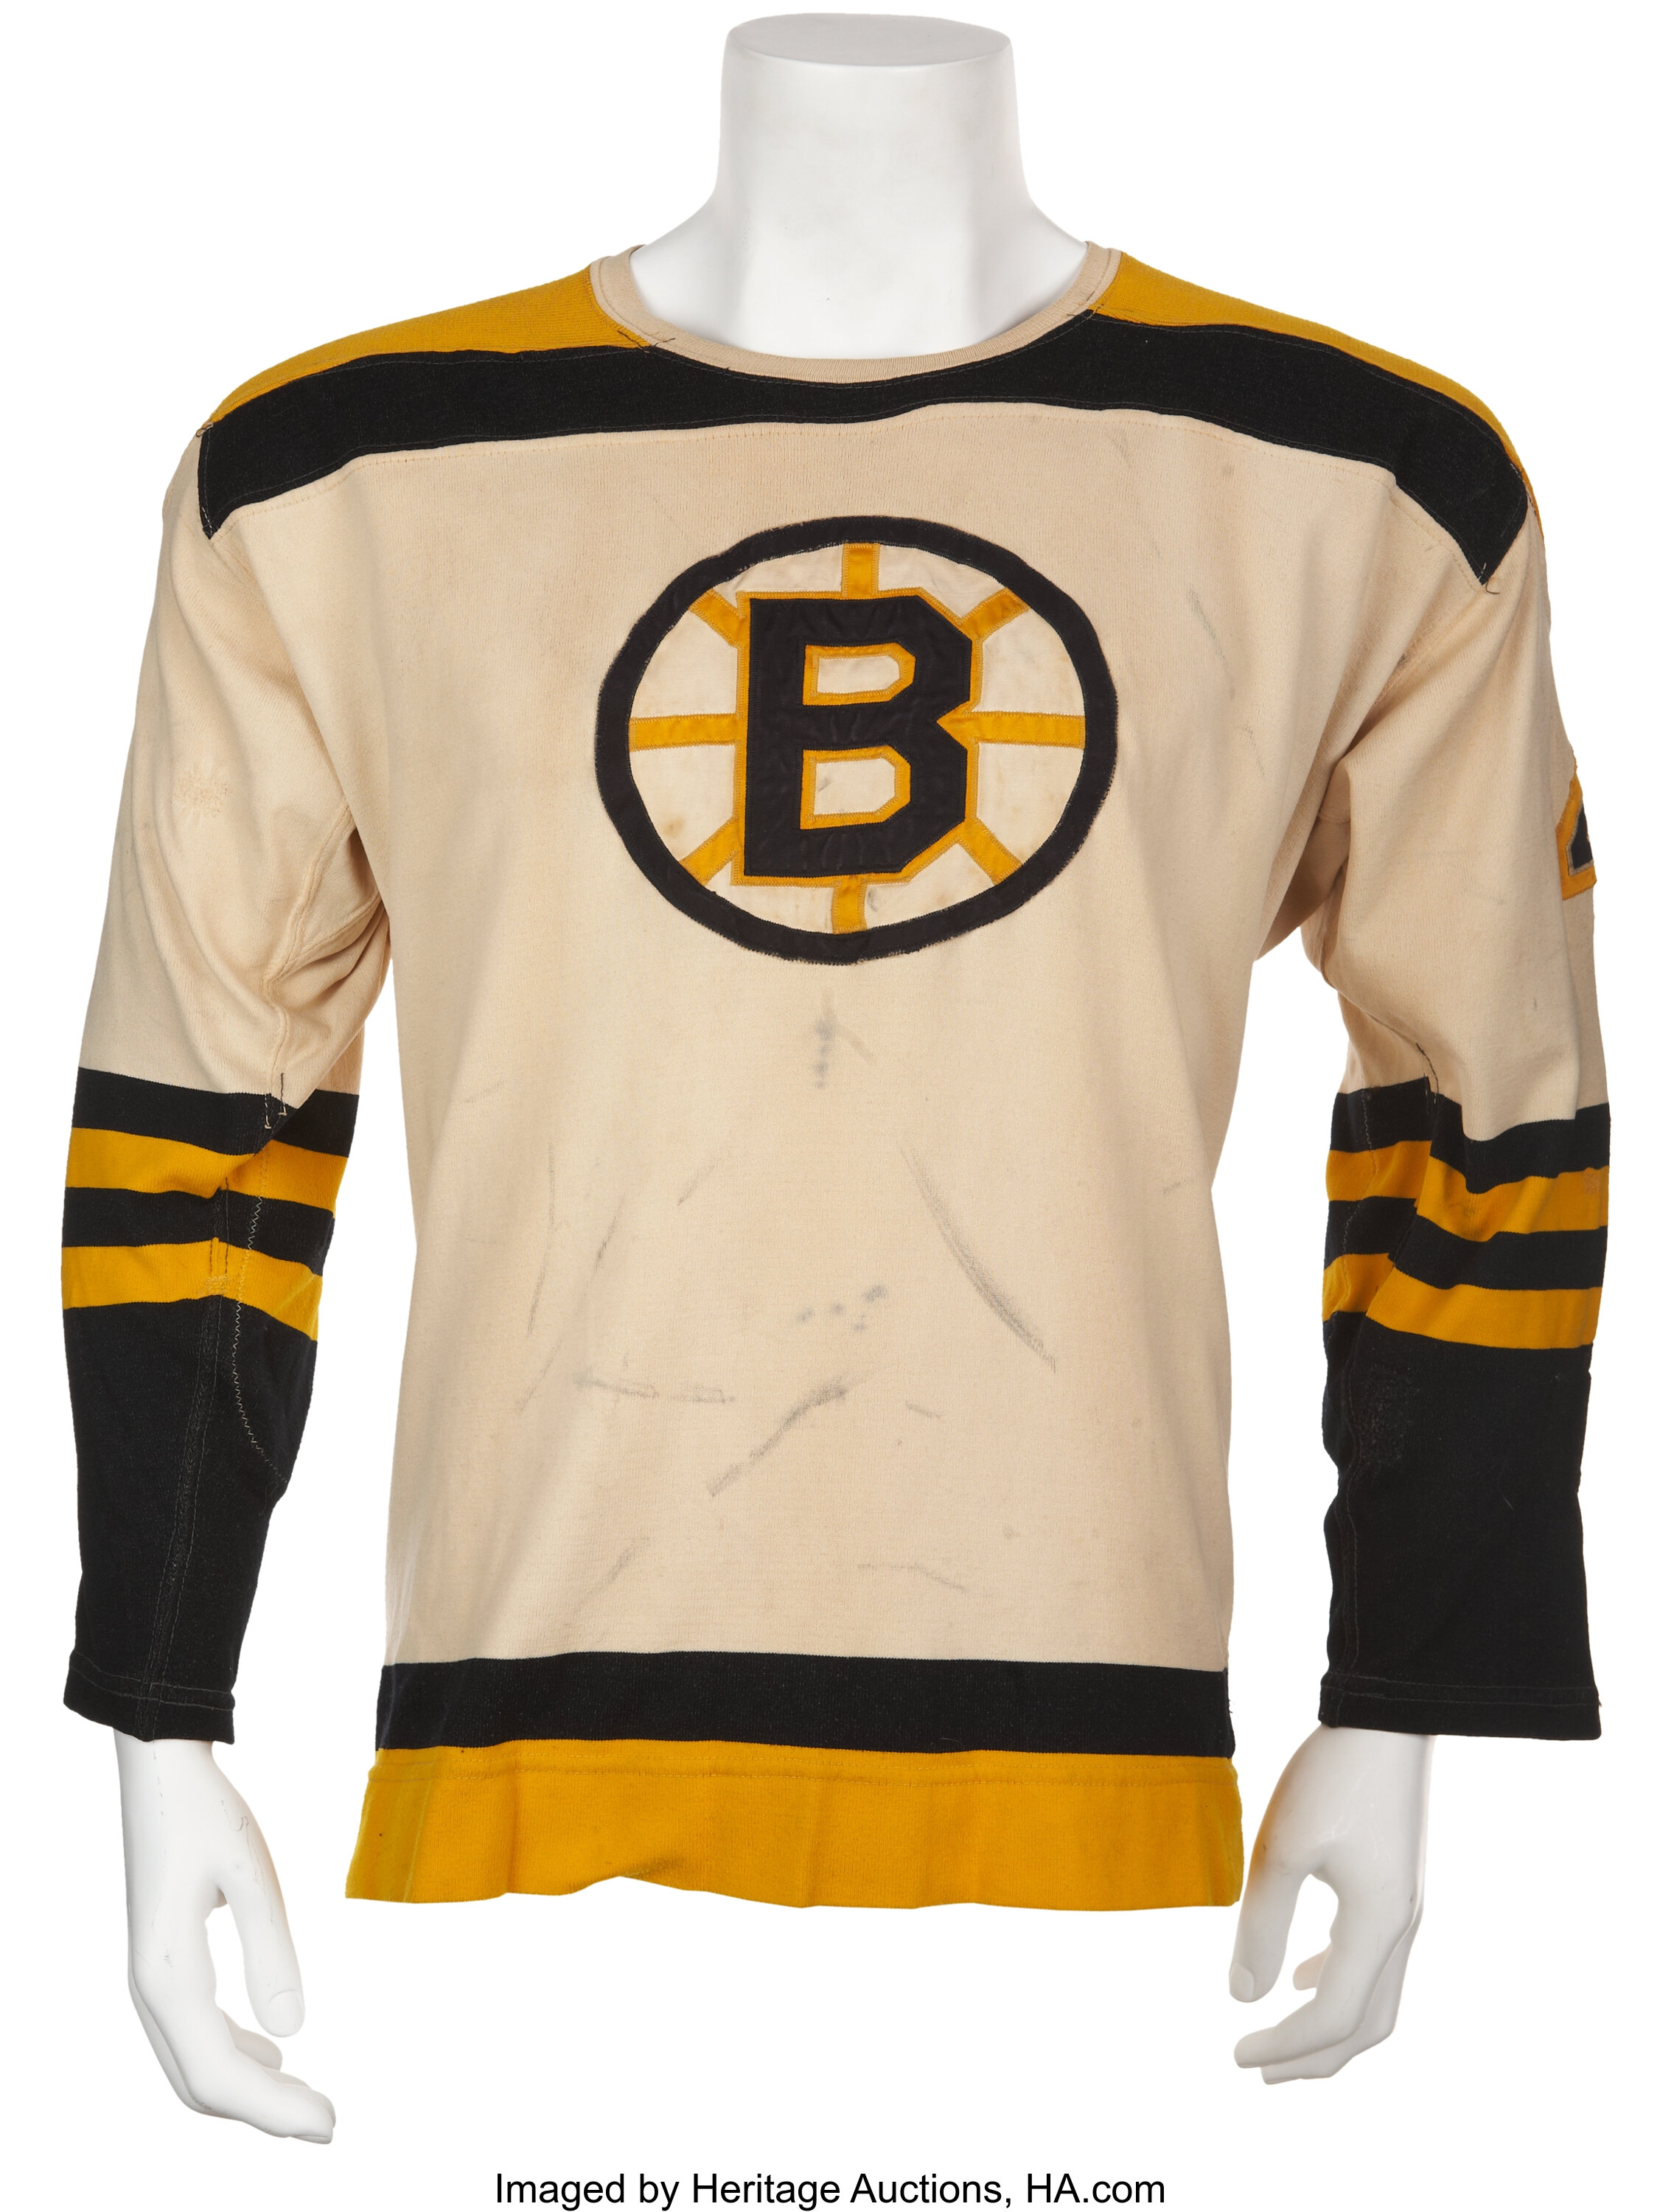 Collectable offering iconic game-worn jersey of NHL legend Bobby